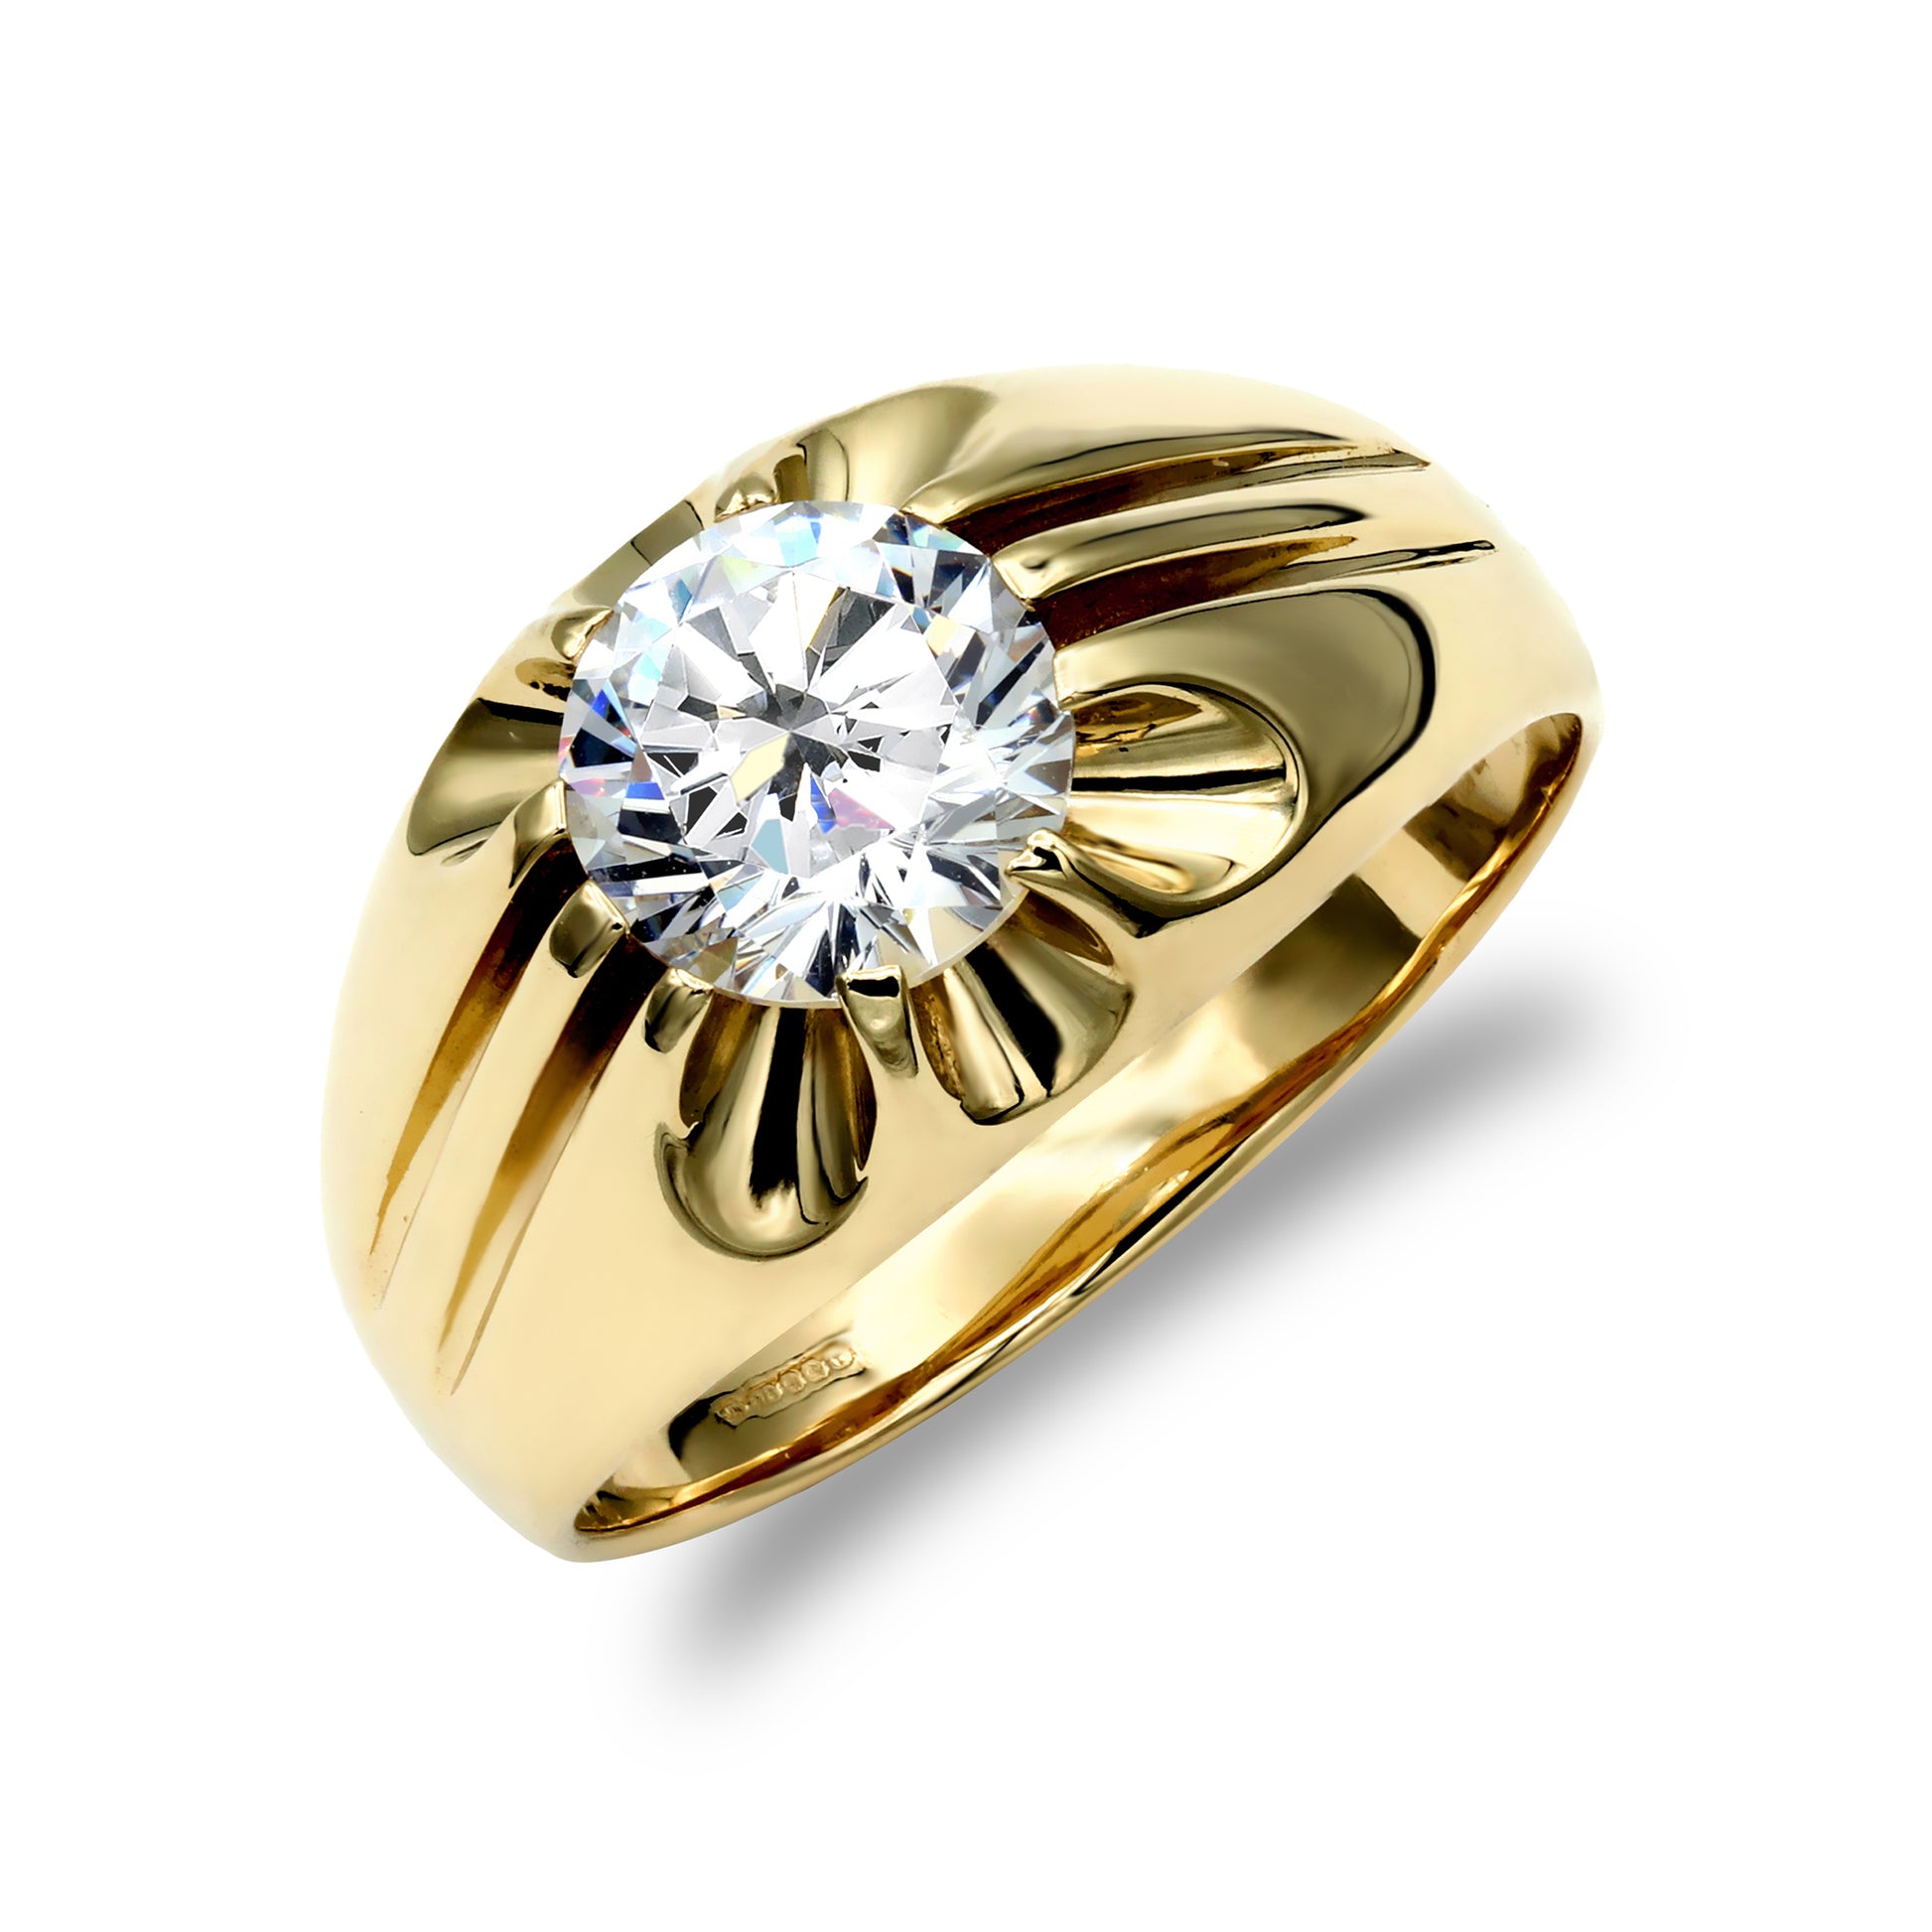 Mens 9ct Gold  CZ 10 Claw Solitaire Gypsy Ring - JRN192